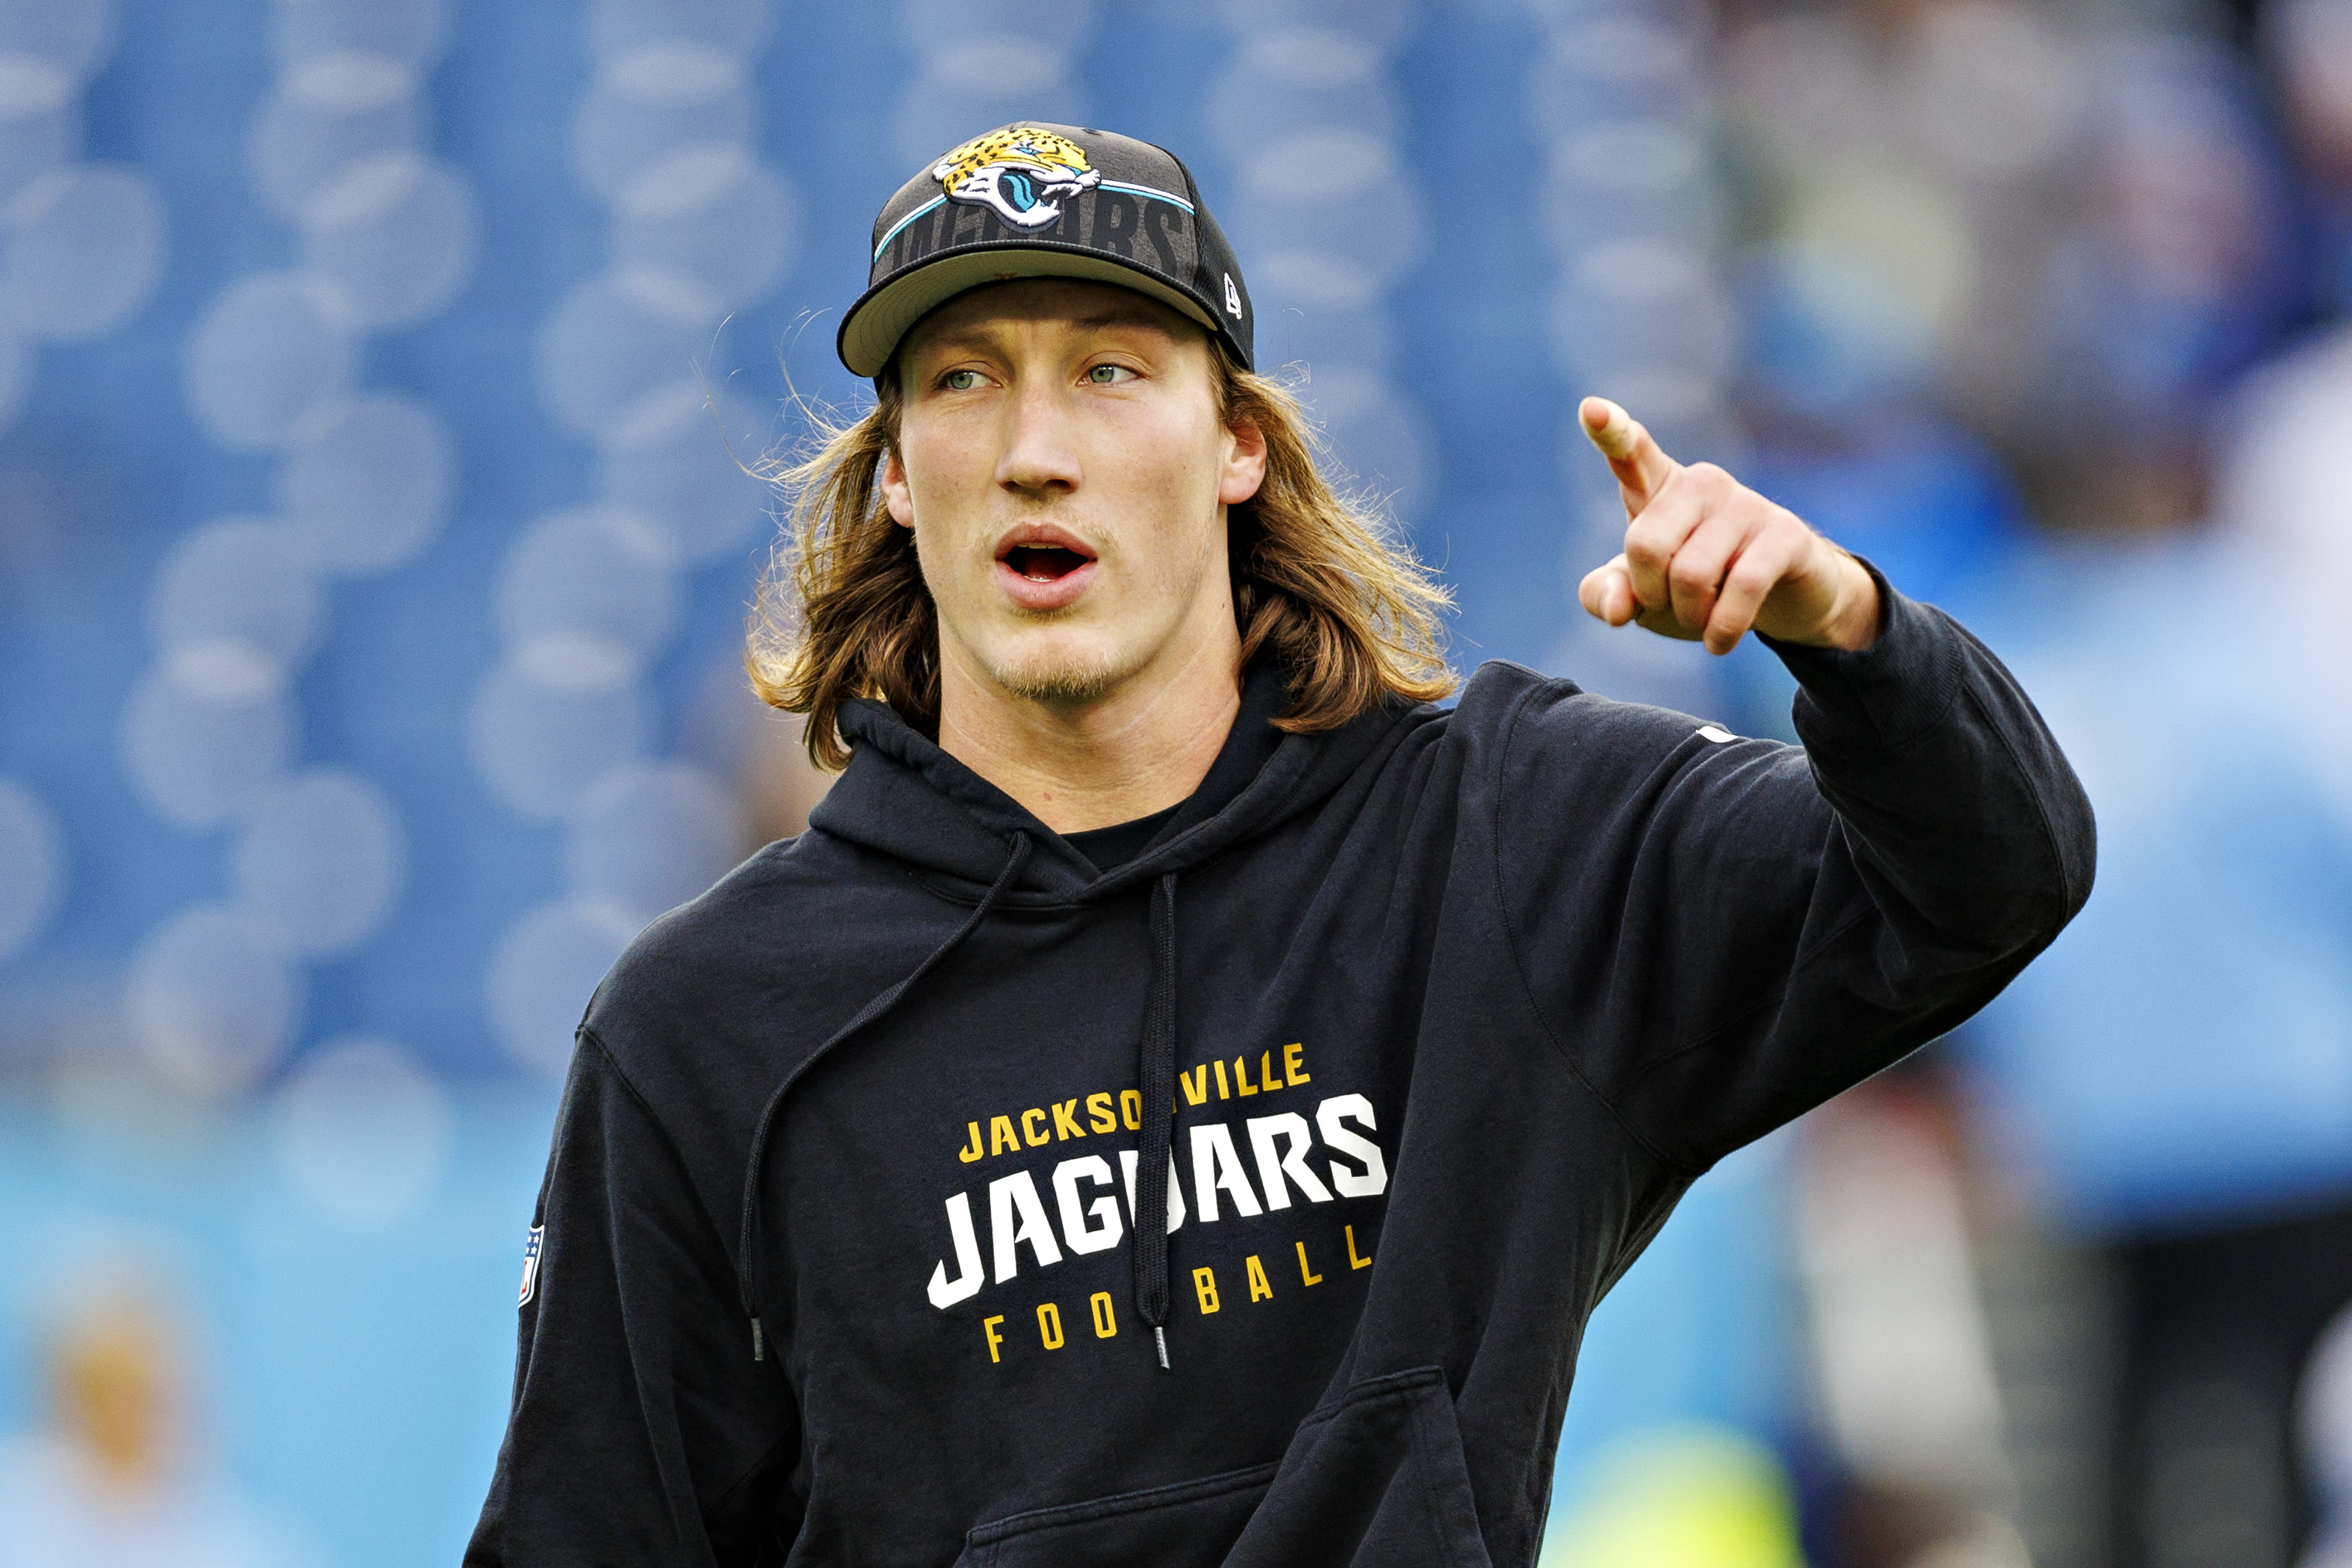 Trevor Lawrence hasn't lived up to the hype. The Jaguars still need to pay him big